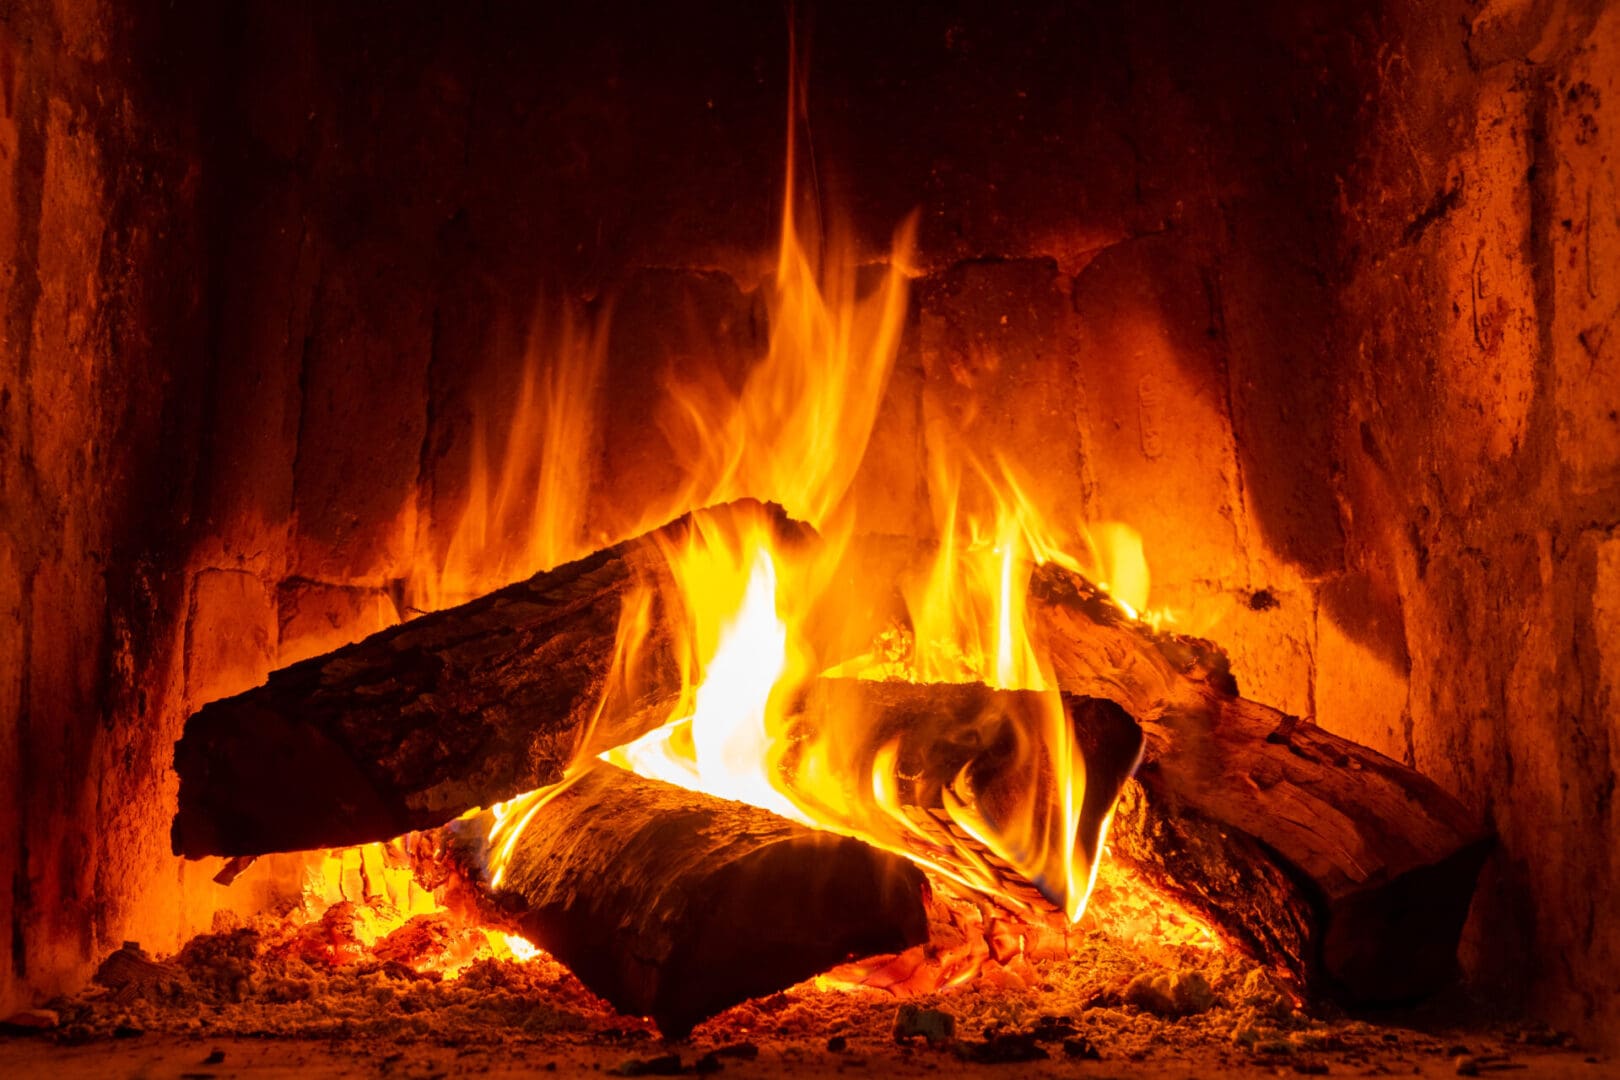 Fire in a fireplace with logs and flames creating a sense of warmth and coziness. Keep warm.